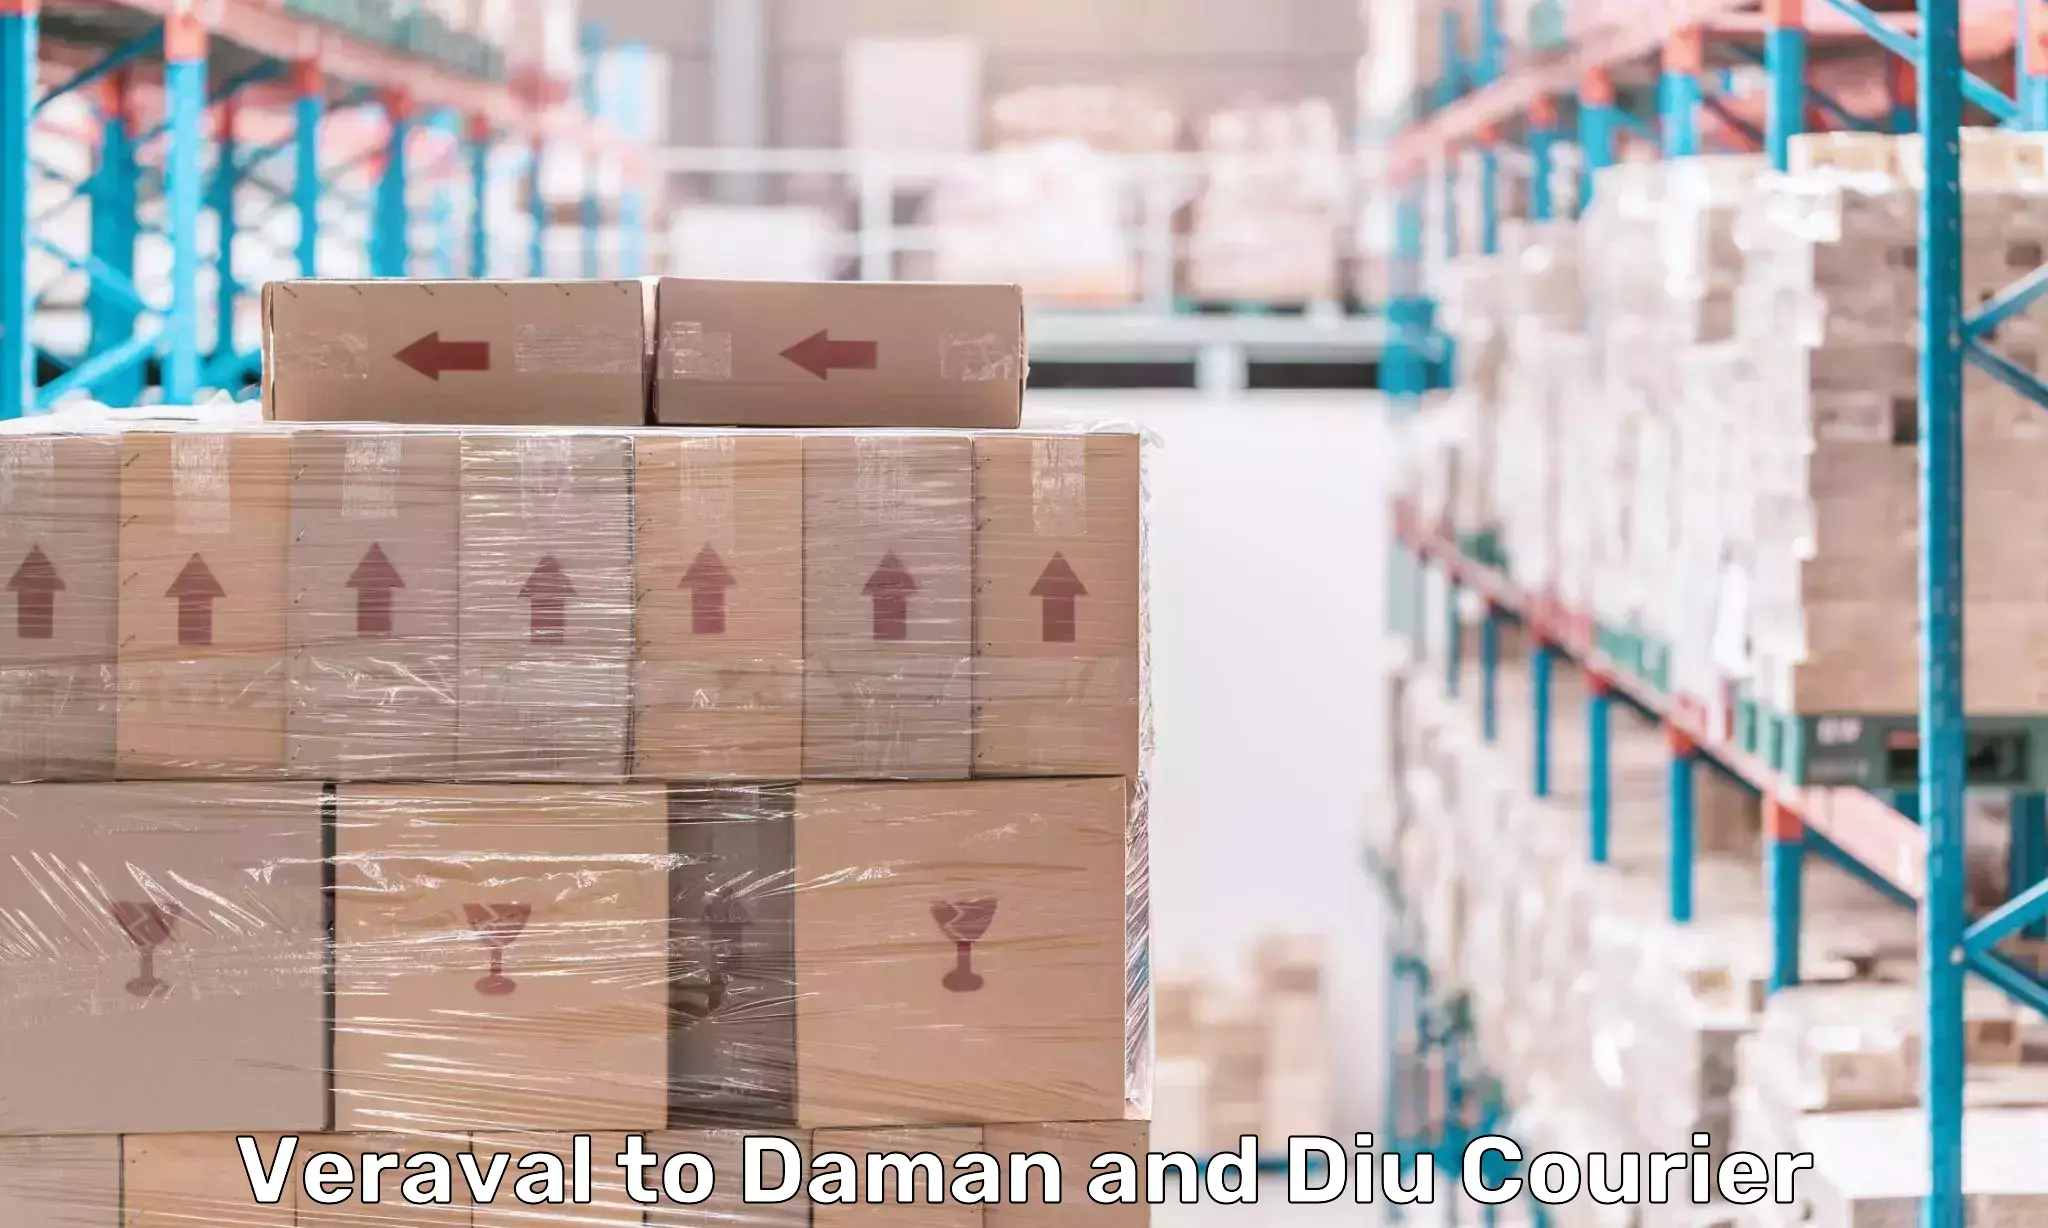 Round-the-clock parcel delivery Veraval to Daman and Diu